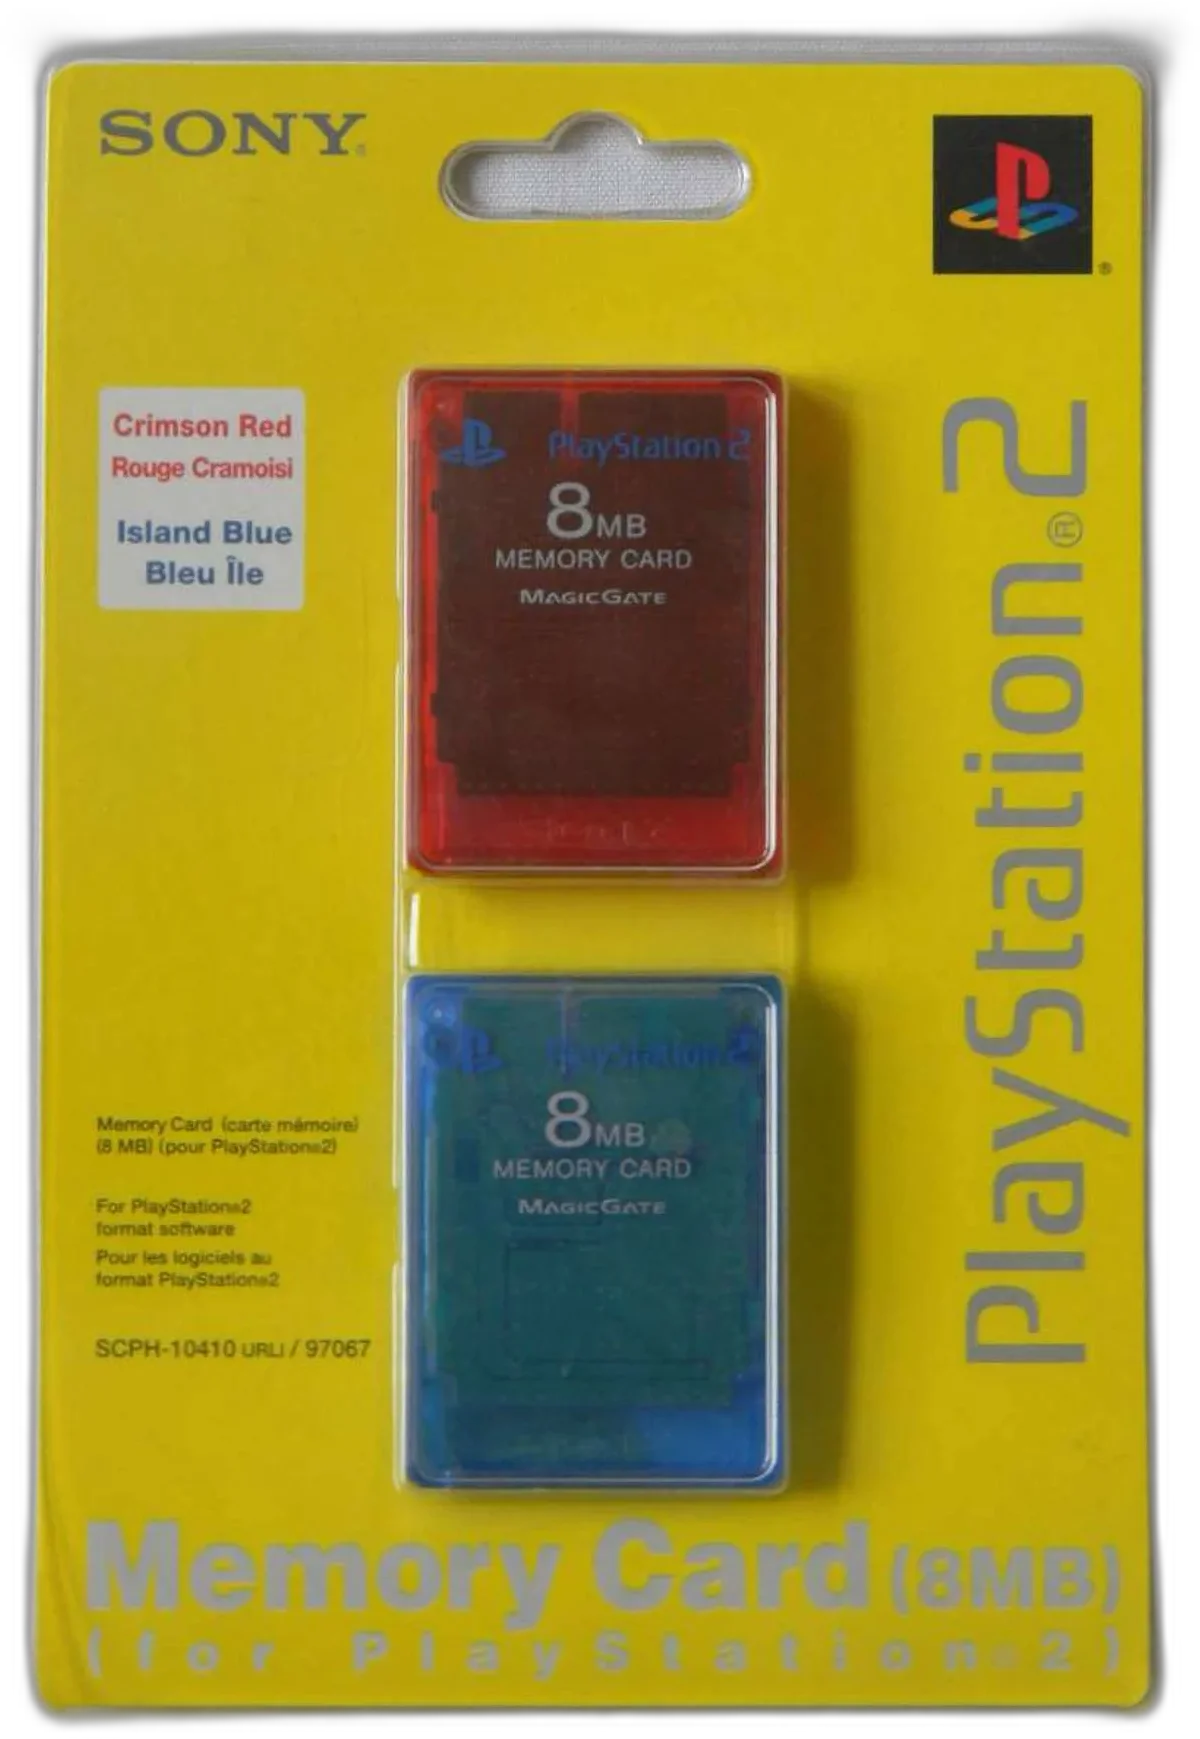  Sony PlayStation 2 Crimson Red + Island Blue Memory Cards